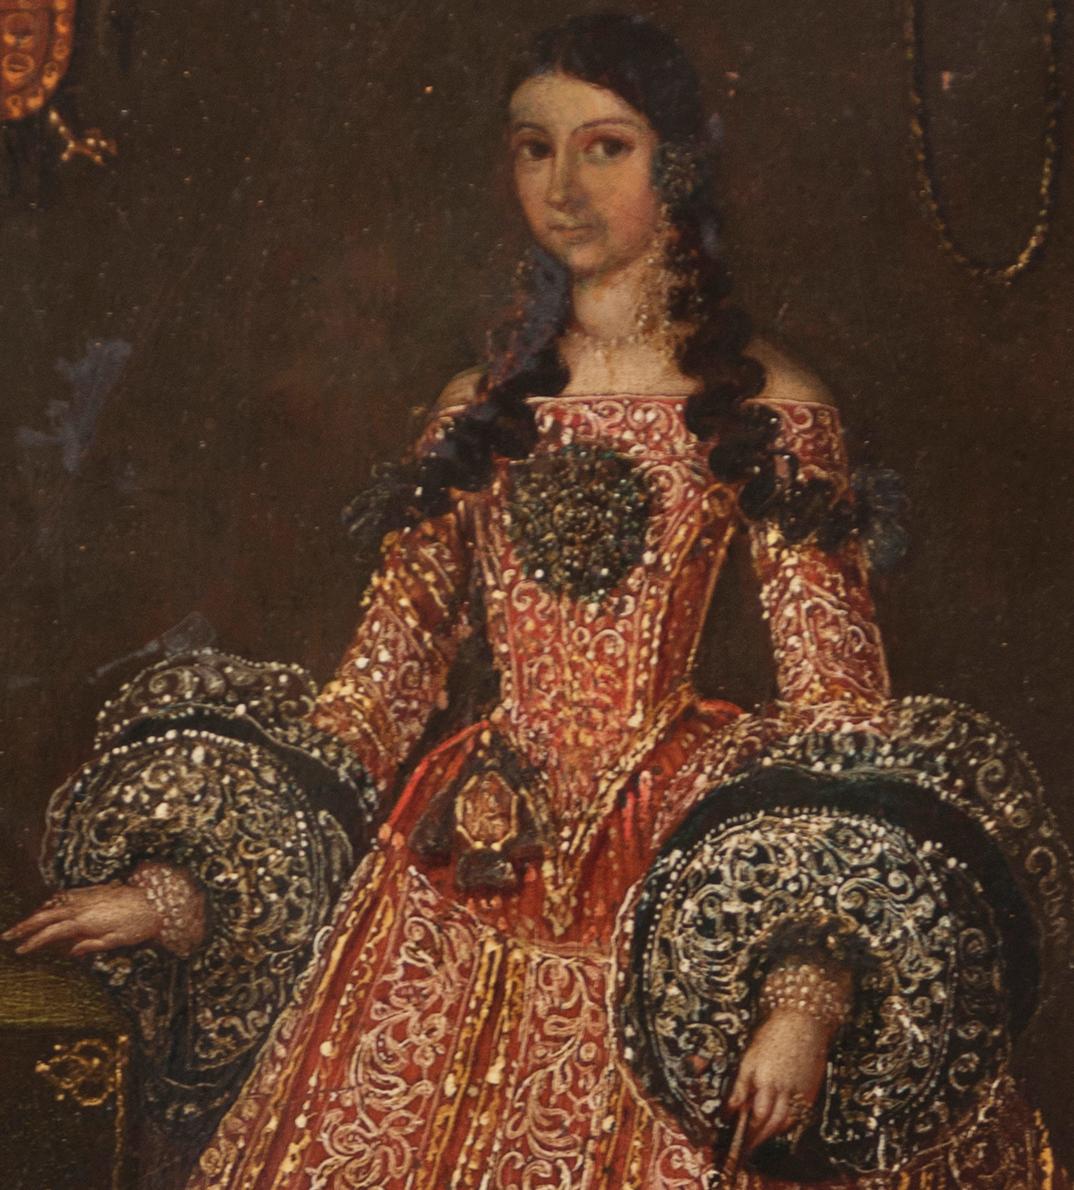 Although there are a fair number of 18th century portraits from the Mexican nobility, those dating from the 17th century are rather rare. The woman portrayed in the present painting may have been born in Spain or may have been a criolla born in